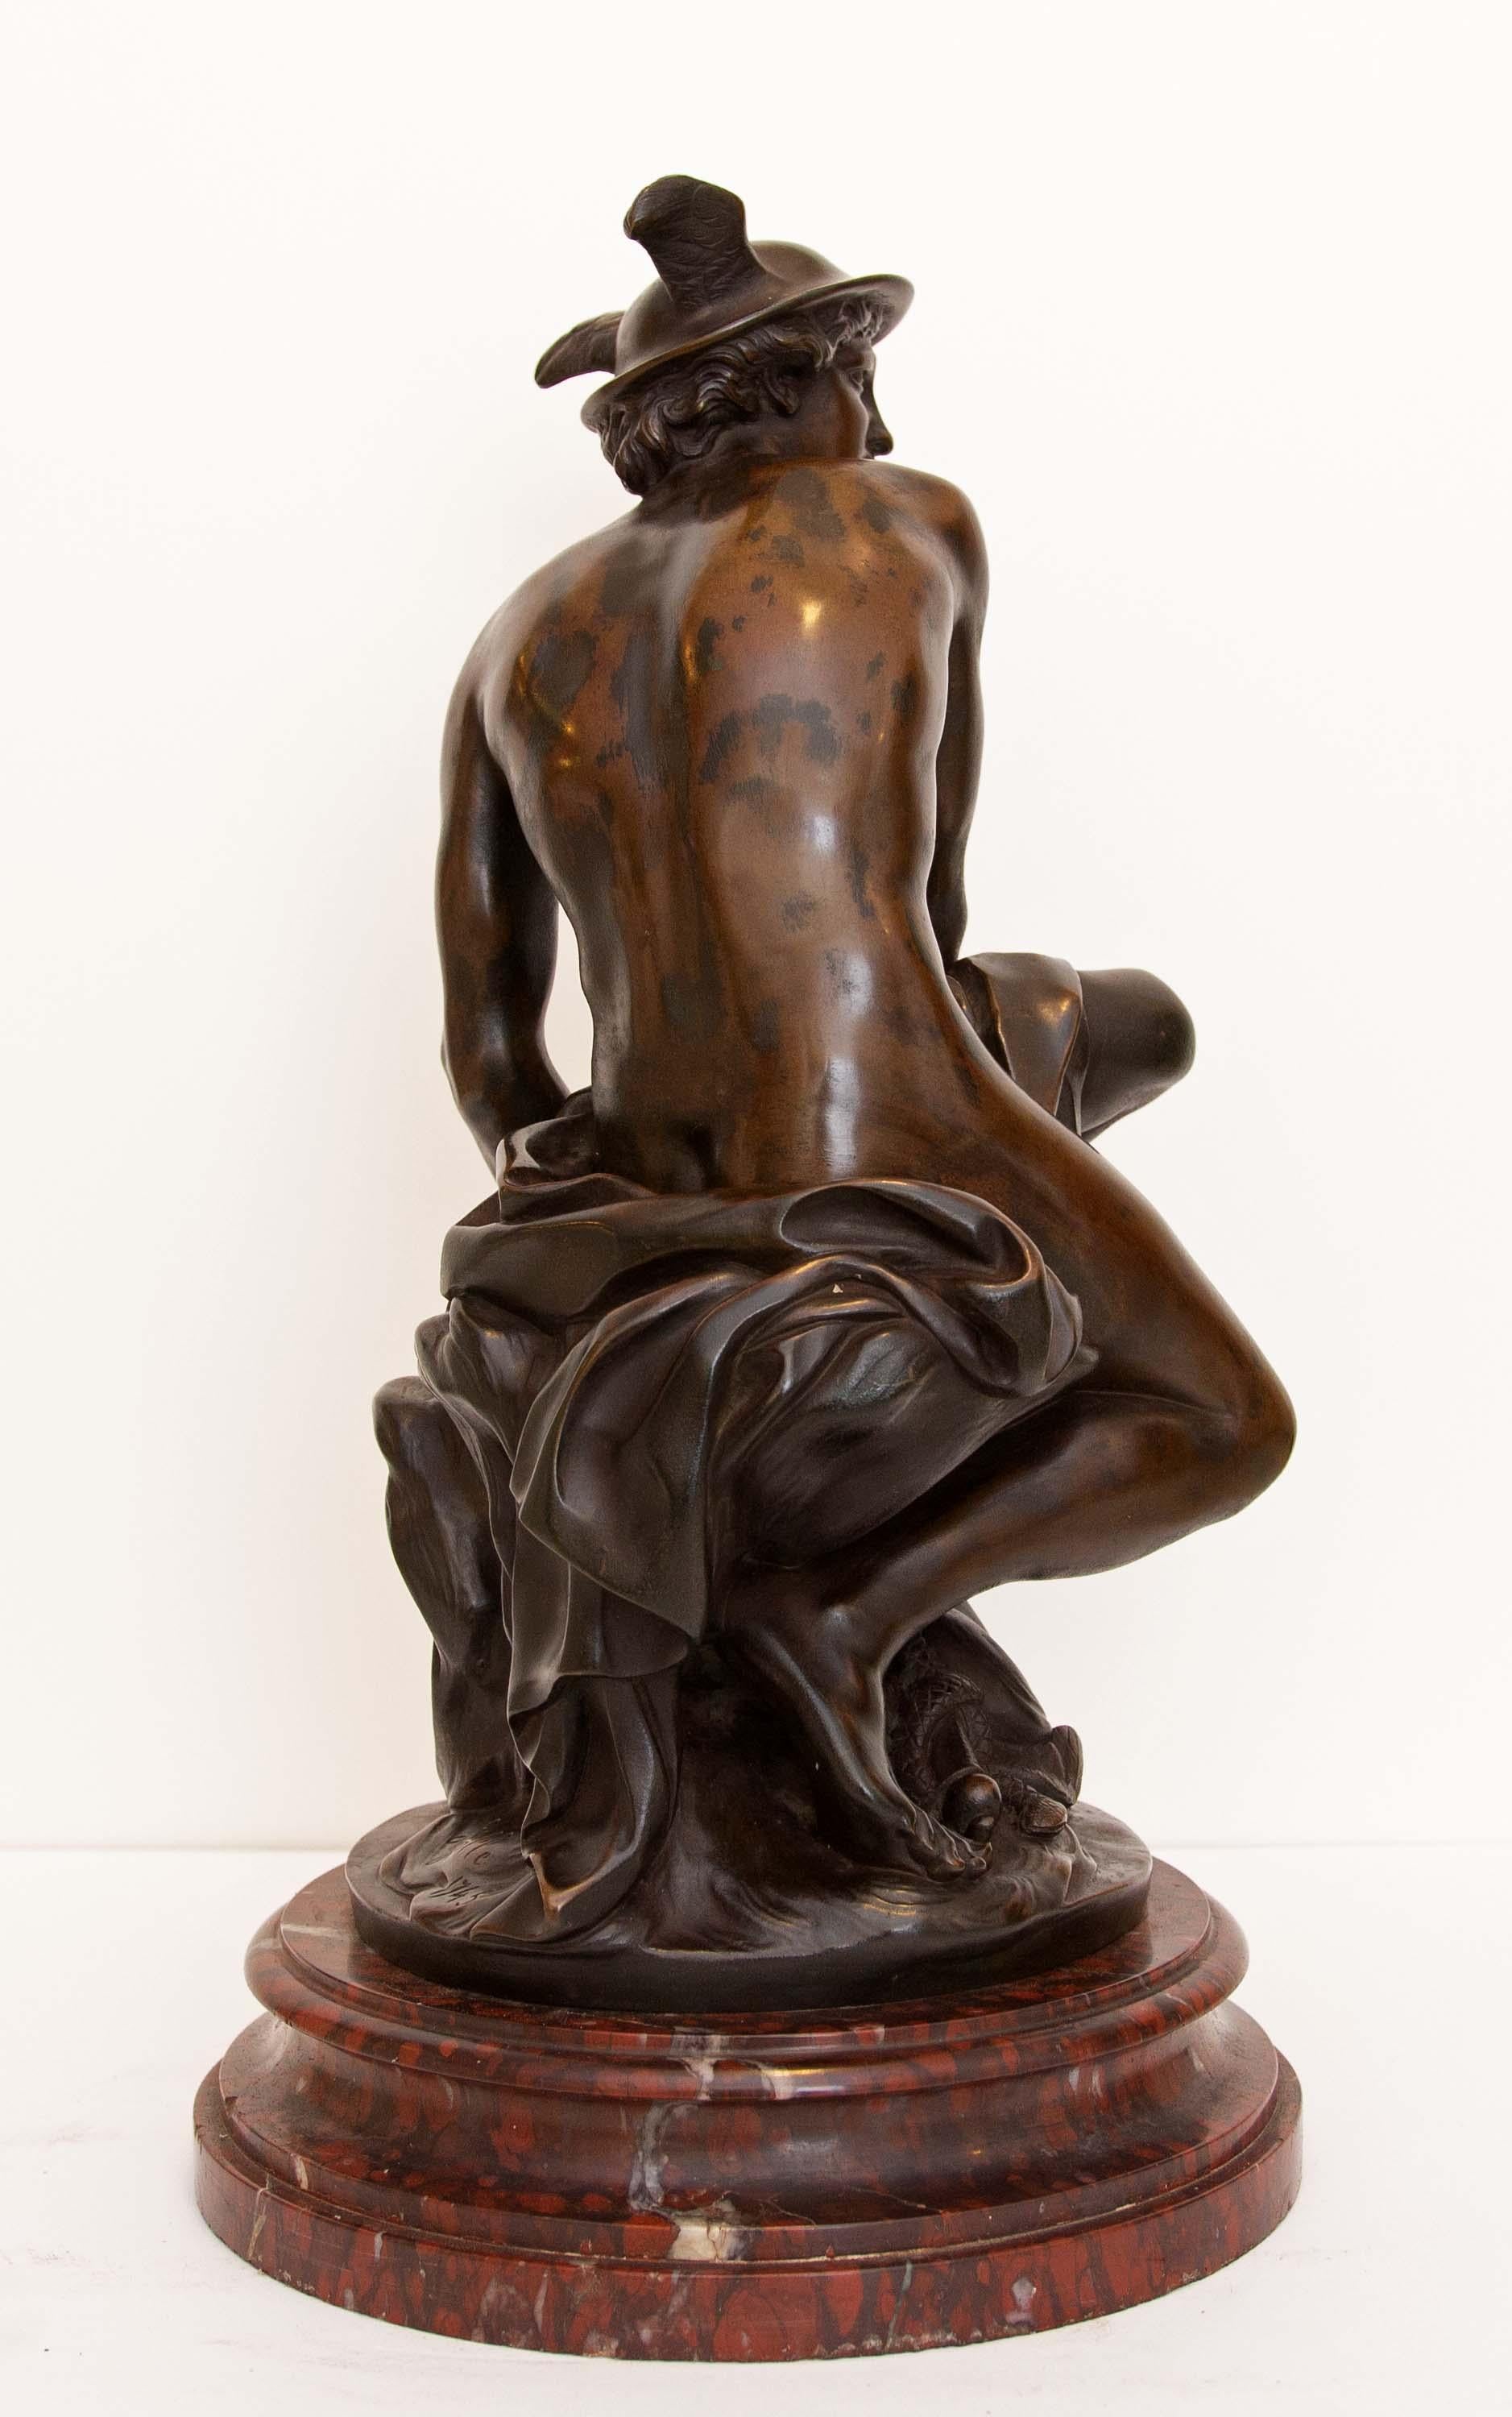 Patinated bronze and rouge marble sculpture of Hermes or Mercury. 19th century after Jean-Baptiste Pigalle.